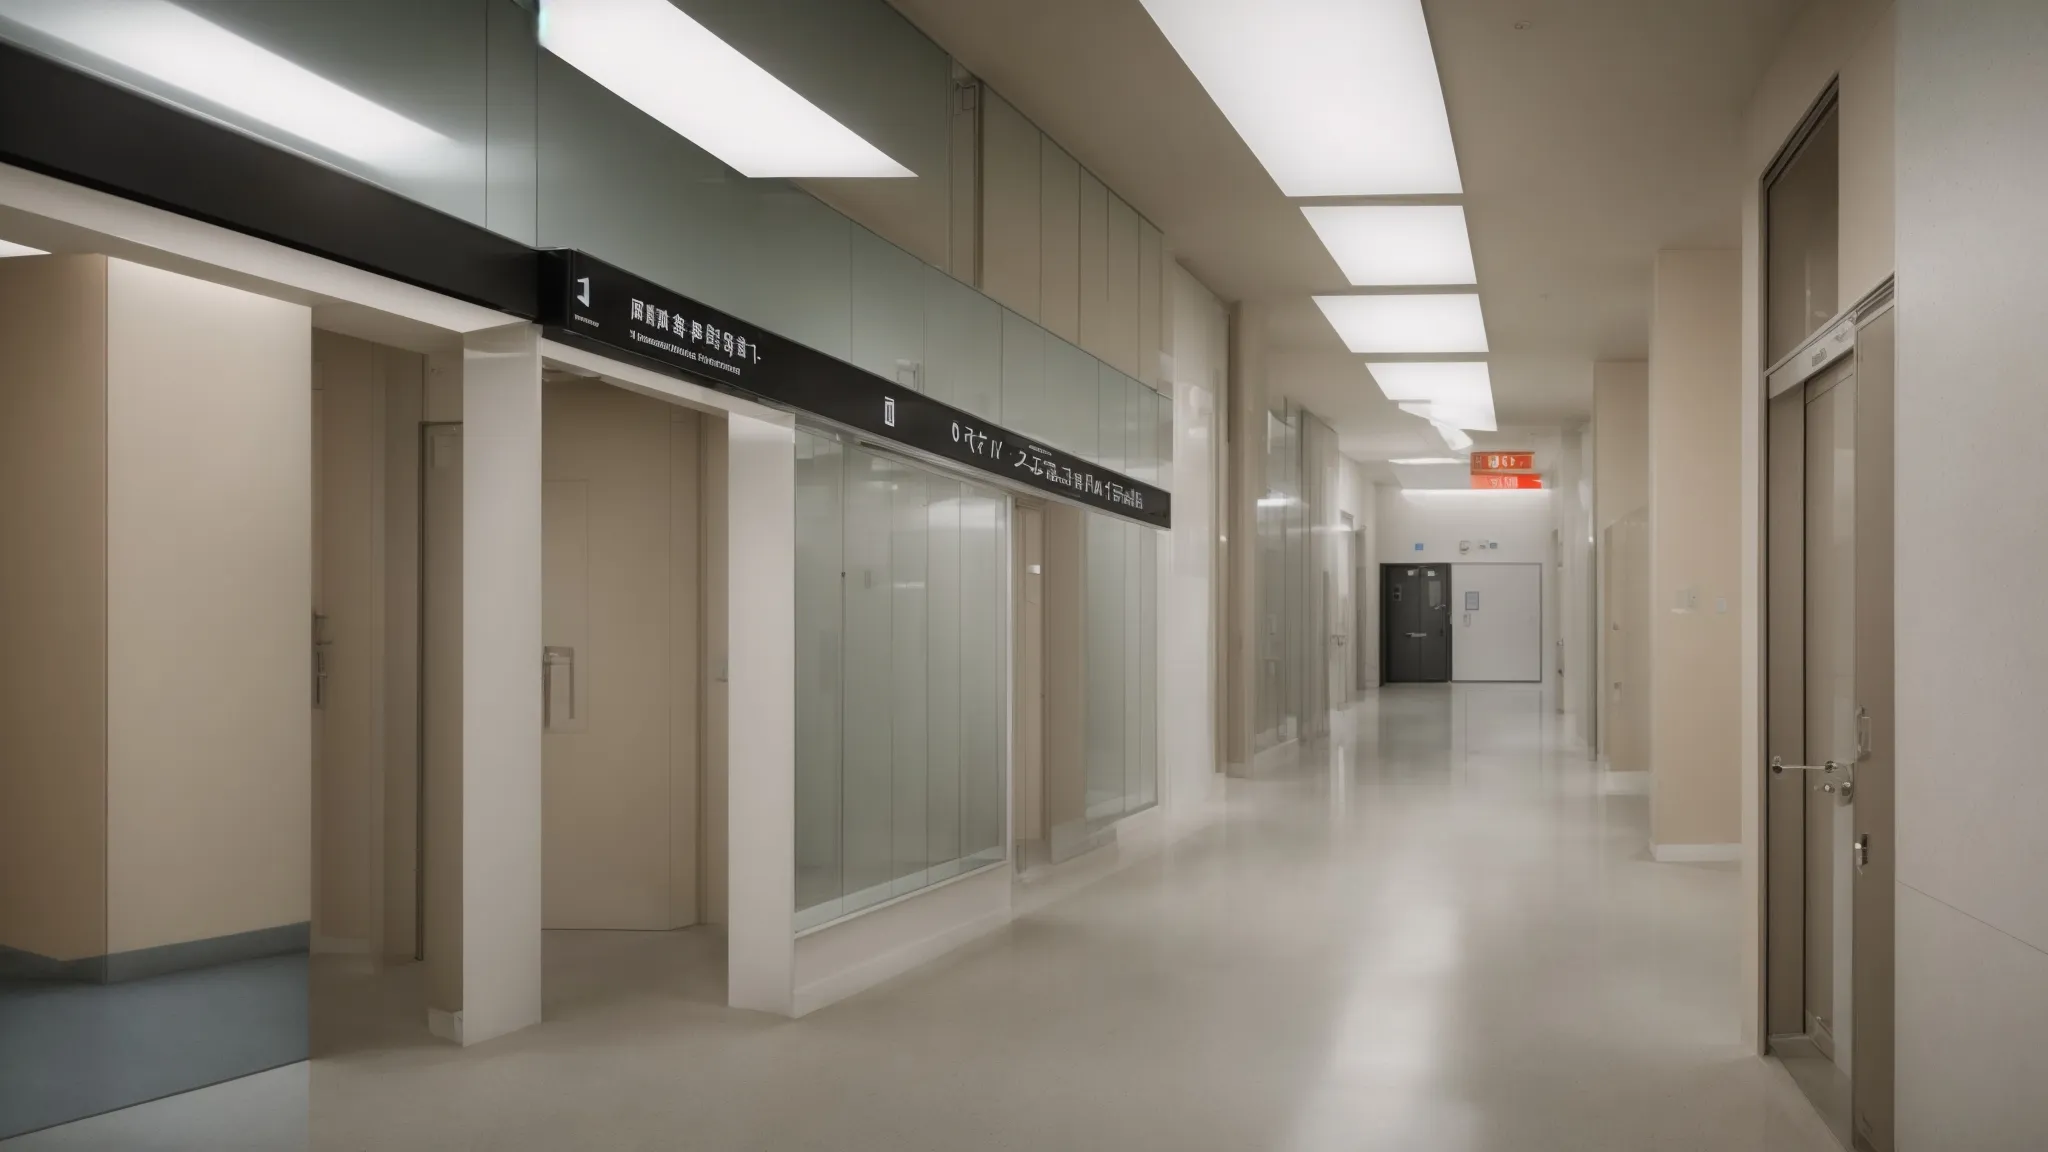 a clean, open hallway with clearly marked doors and directional signage, embodying simplified navigation.